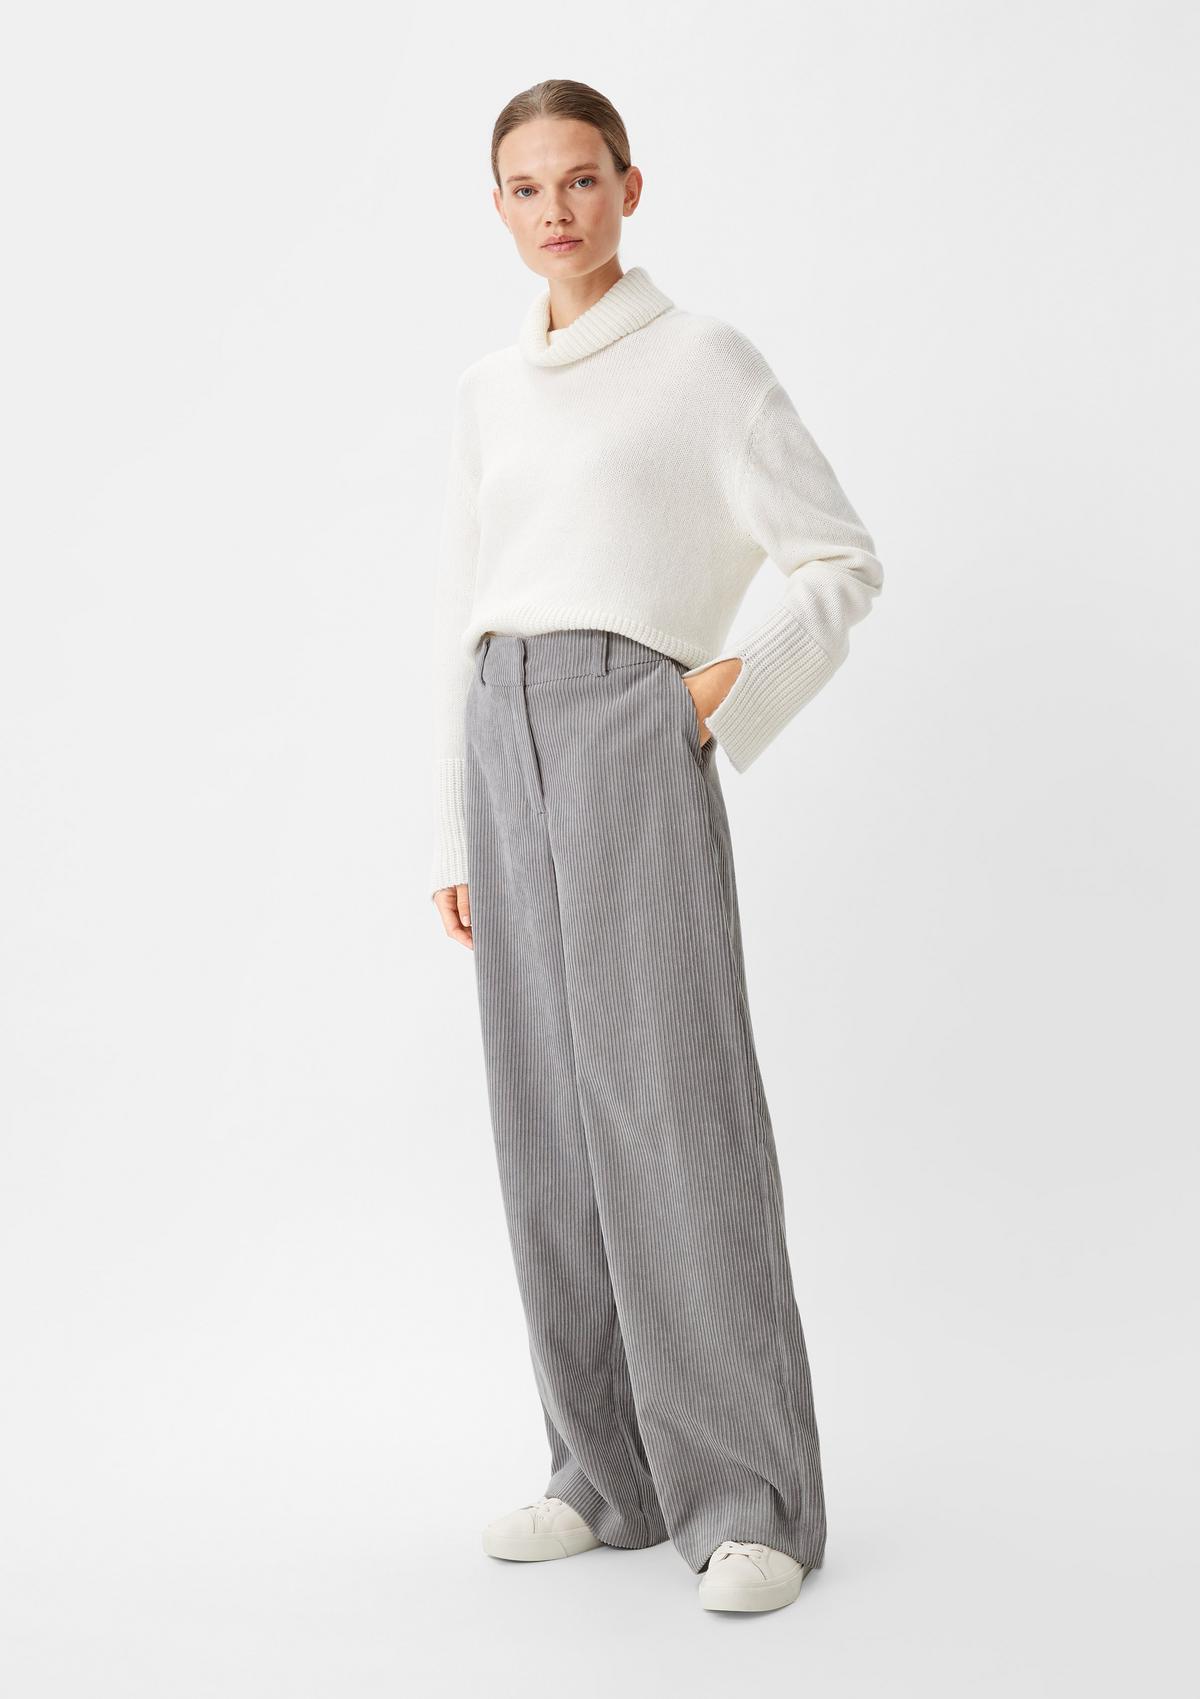 Relaxed fit: corduroy trousers with a flared leg